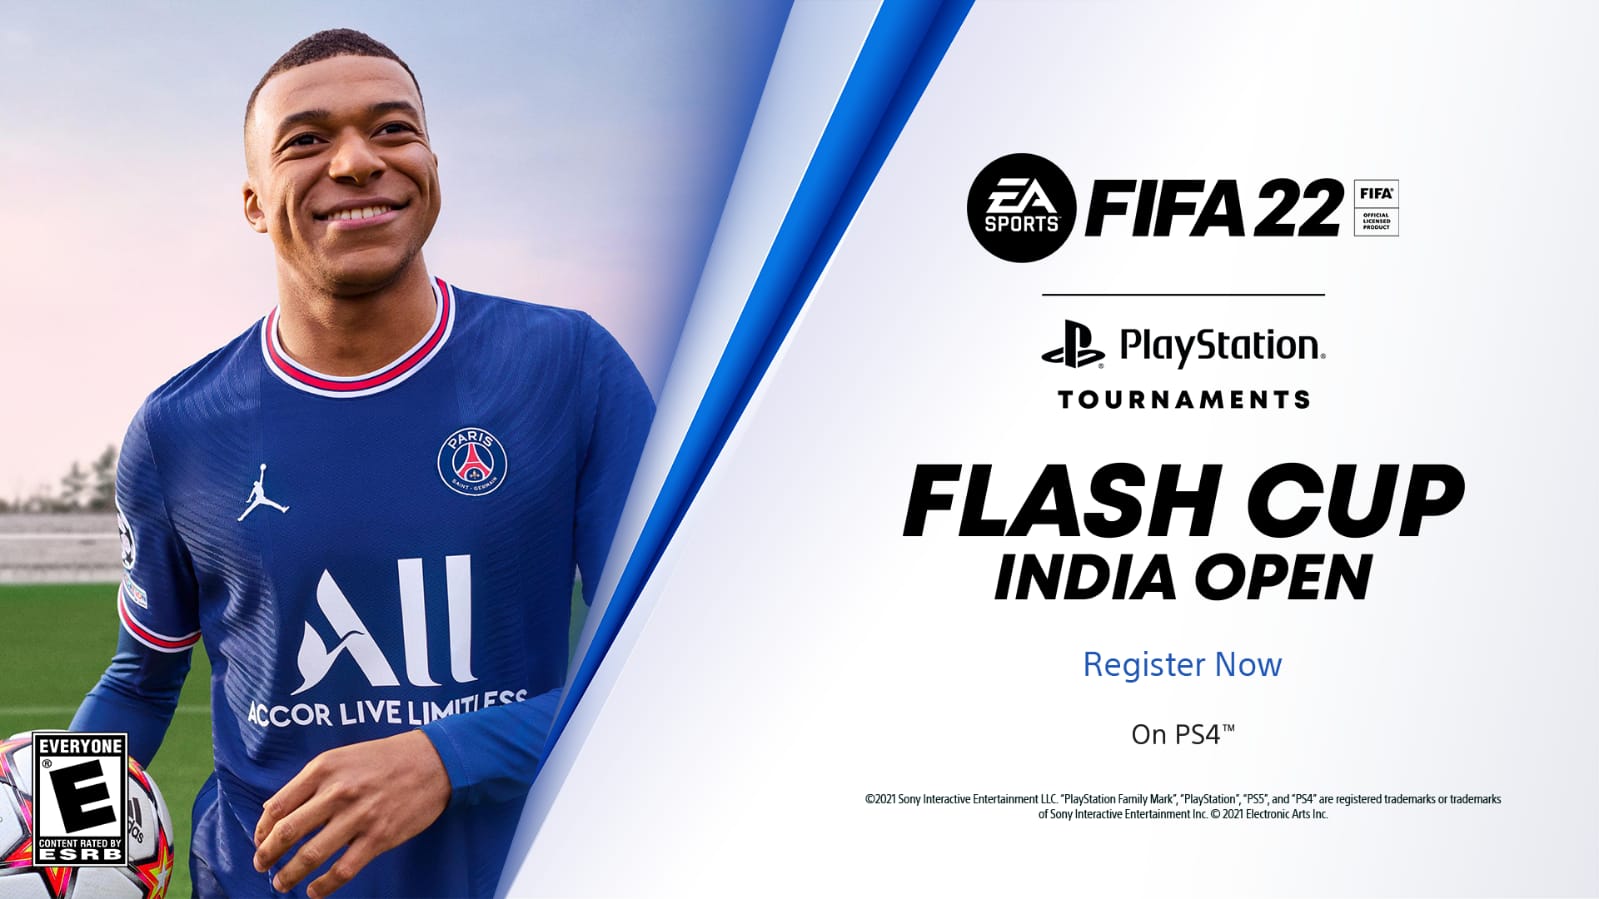 FIFA 22 Flash Cup India open: Check out Format, Schedule, and everything about the event